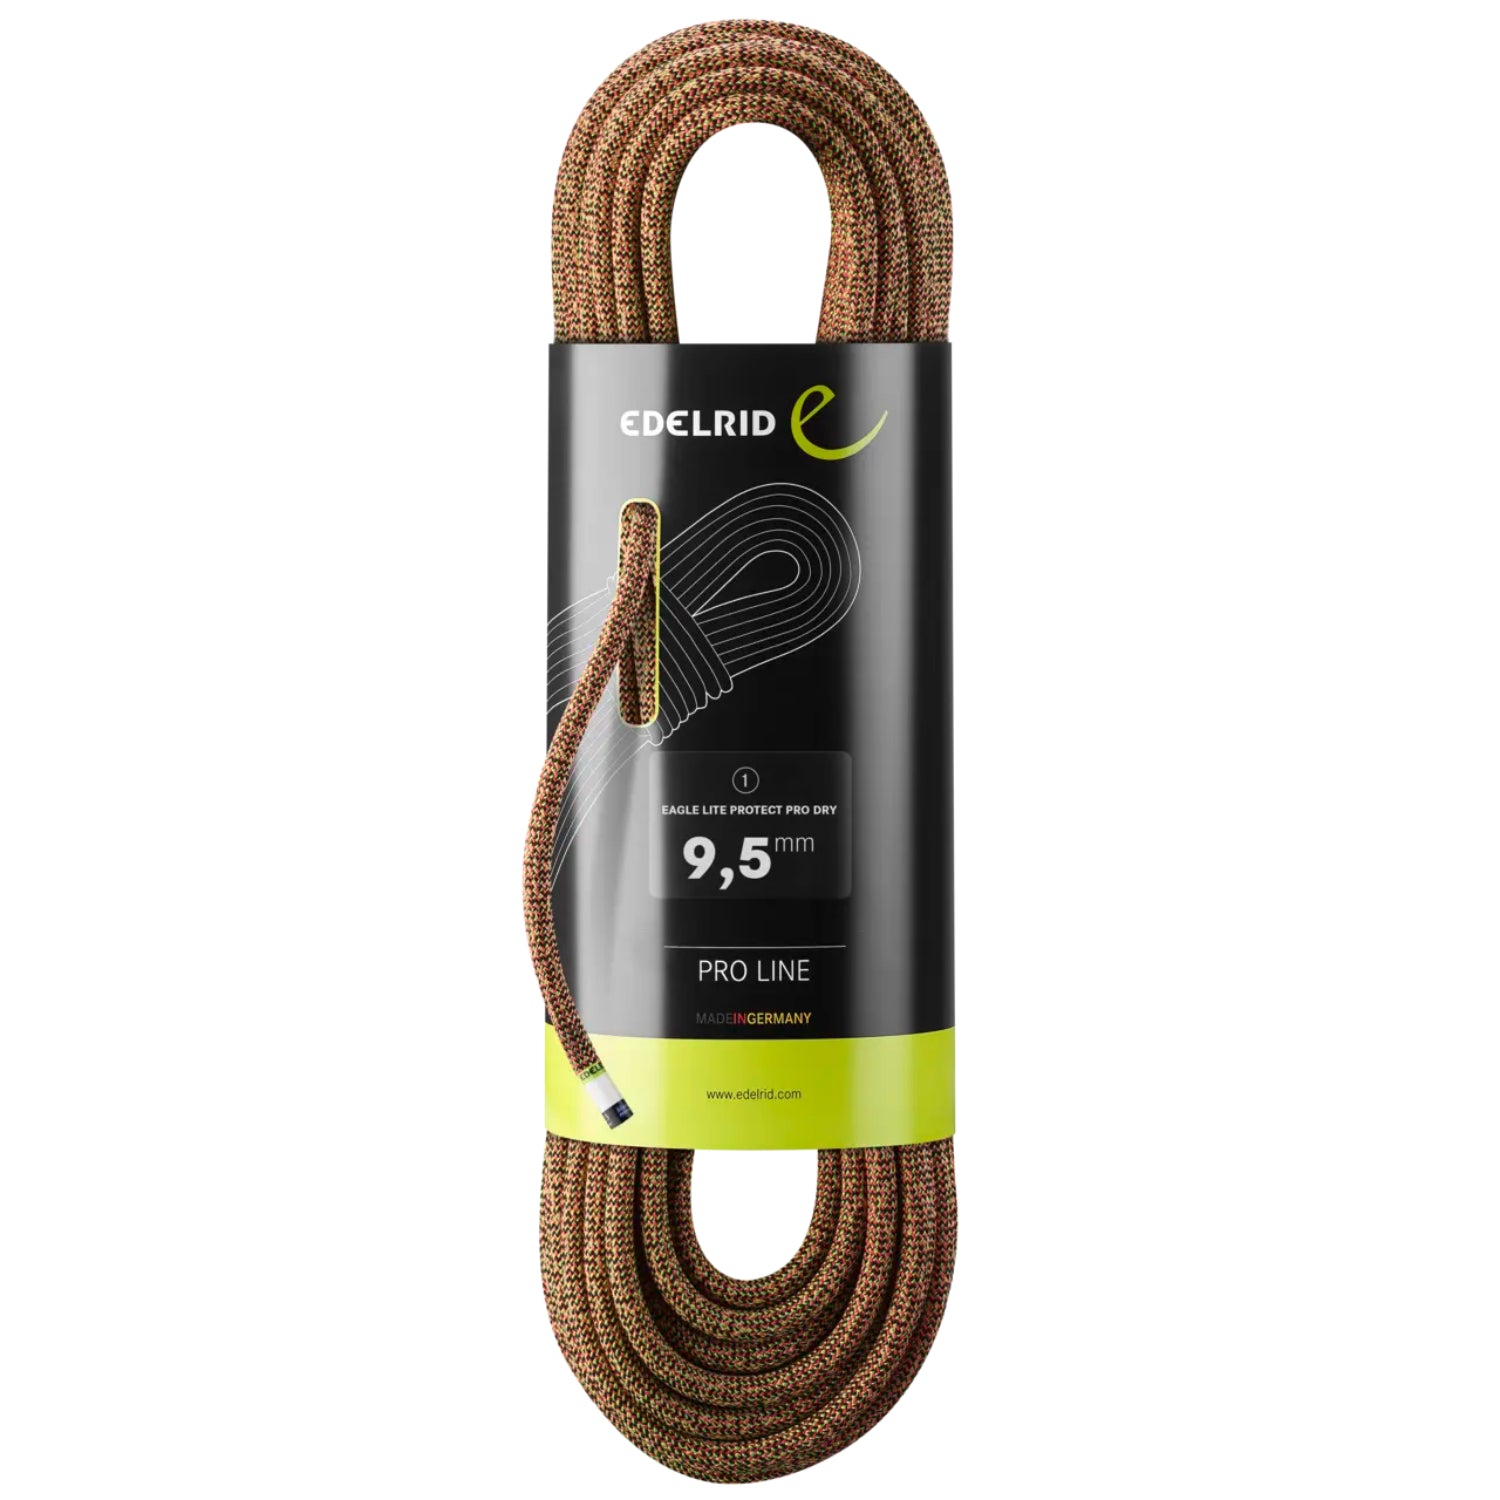 Edelrid Eagle Lite Protect Pro Dry 9.5mm climbing rope